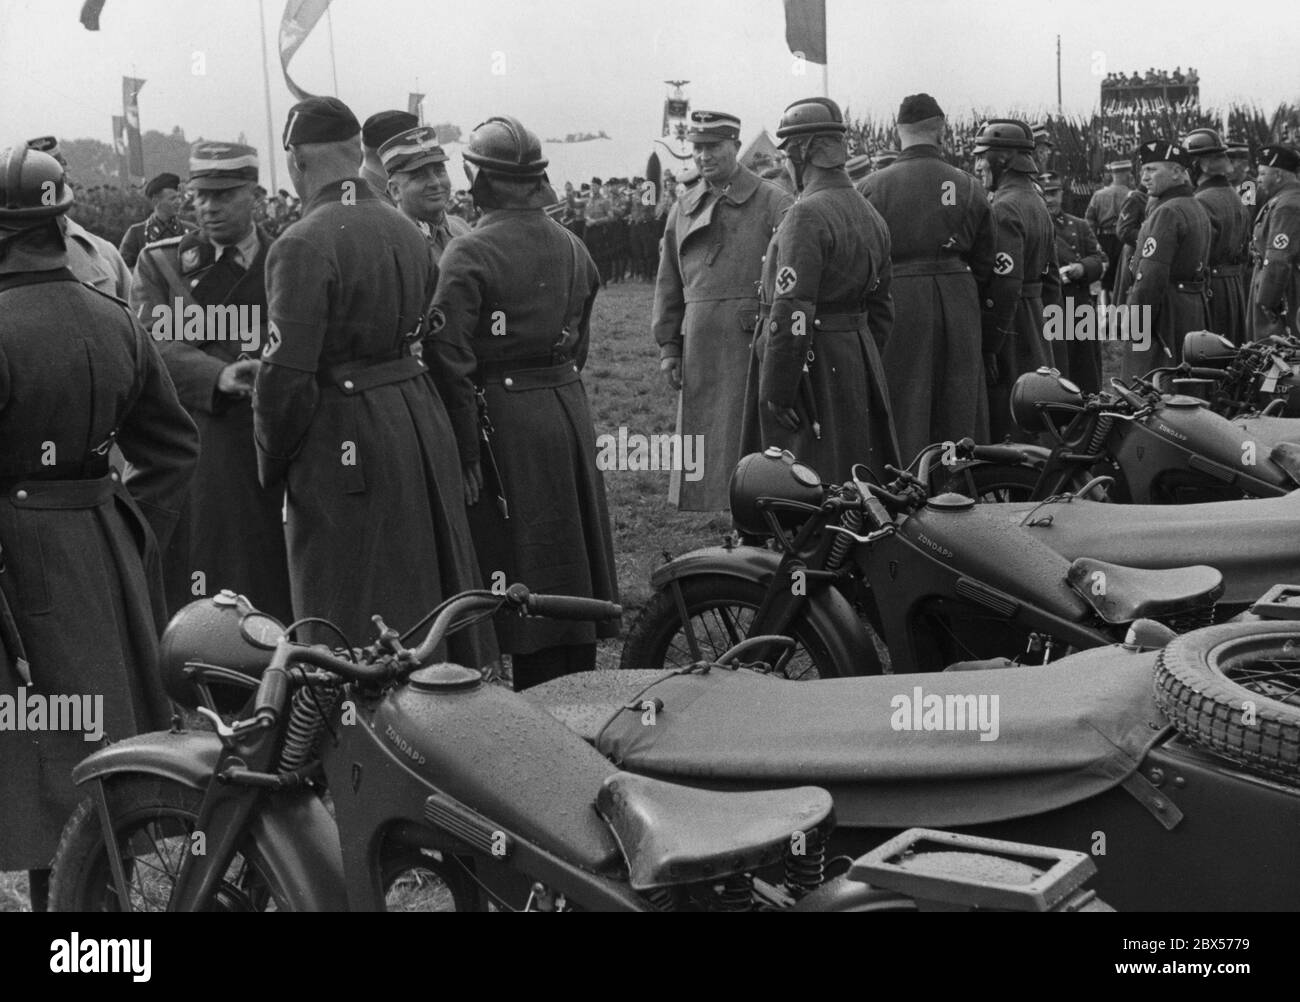 Corps Commander Adolf Huehnlein congratulates the winners of the NSKK's Reich competitions and presents each of them with a sidecar motorcycle as a prize in the NSKK tent camp during the Reich Party Congress in Nuremberg. Stock Photo